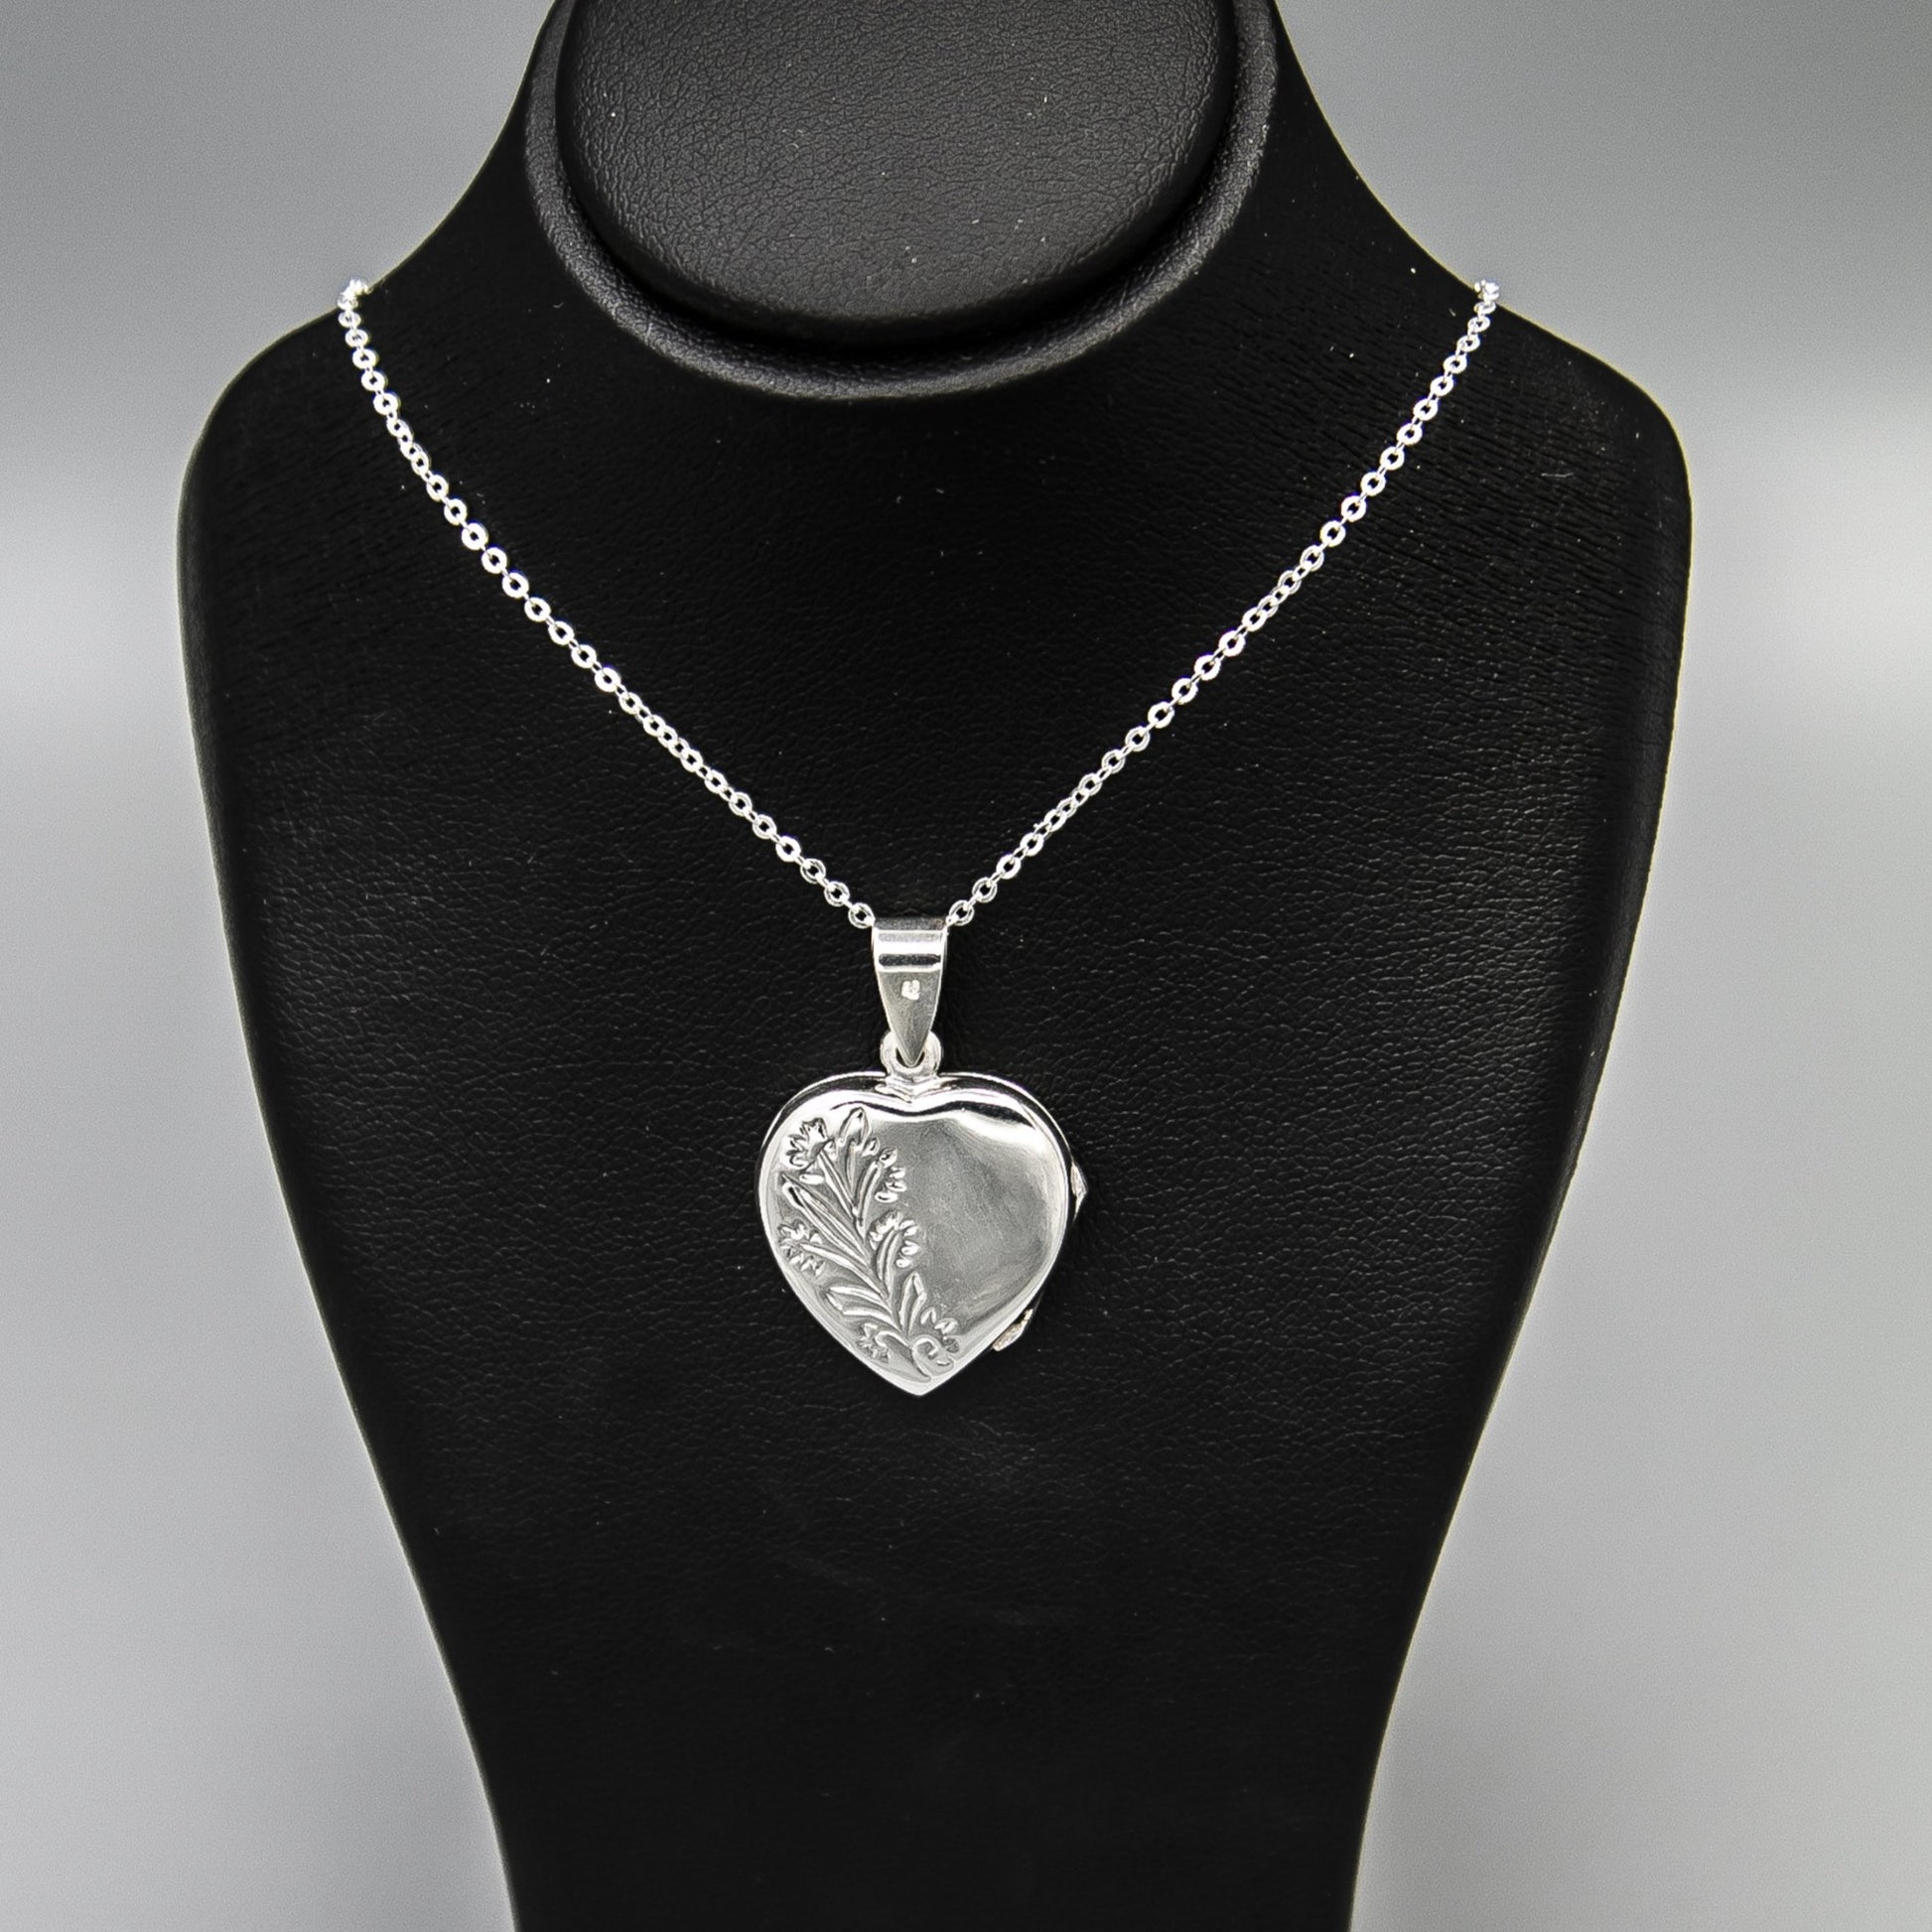 Silver heart-shaped photo locket pendant with embellishment on Italian silver chain